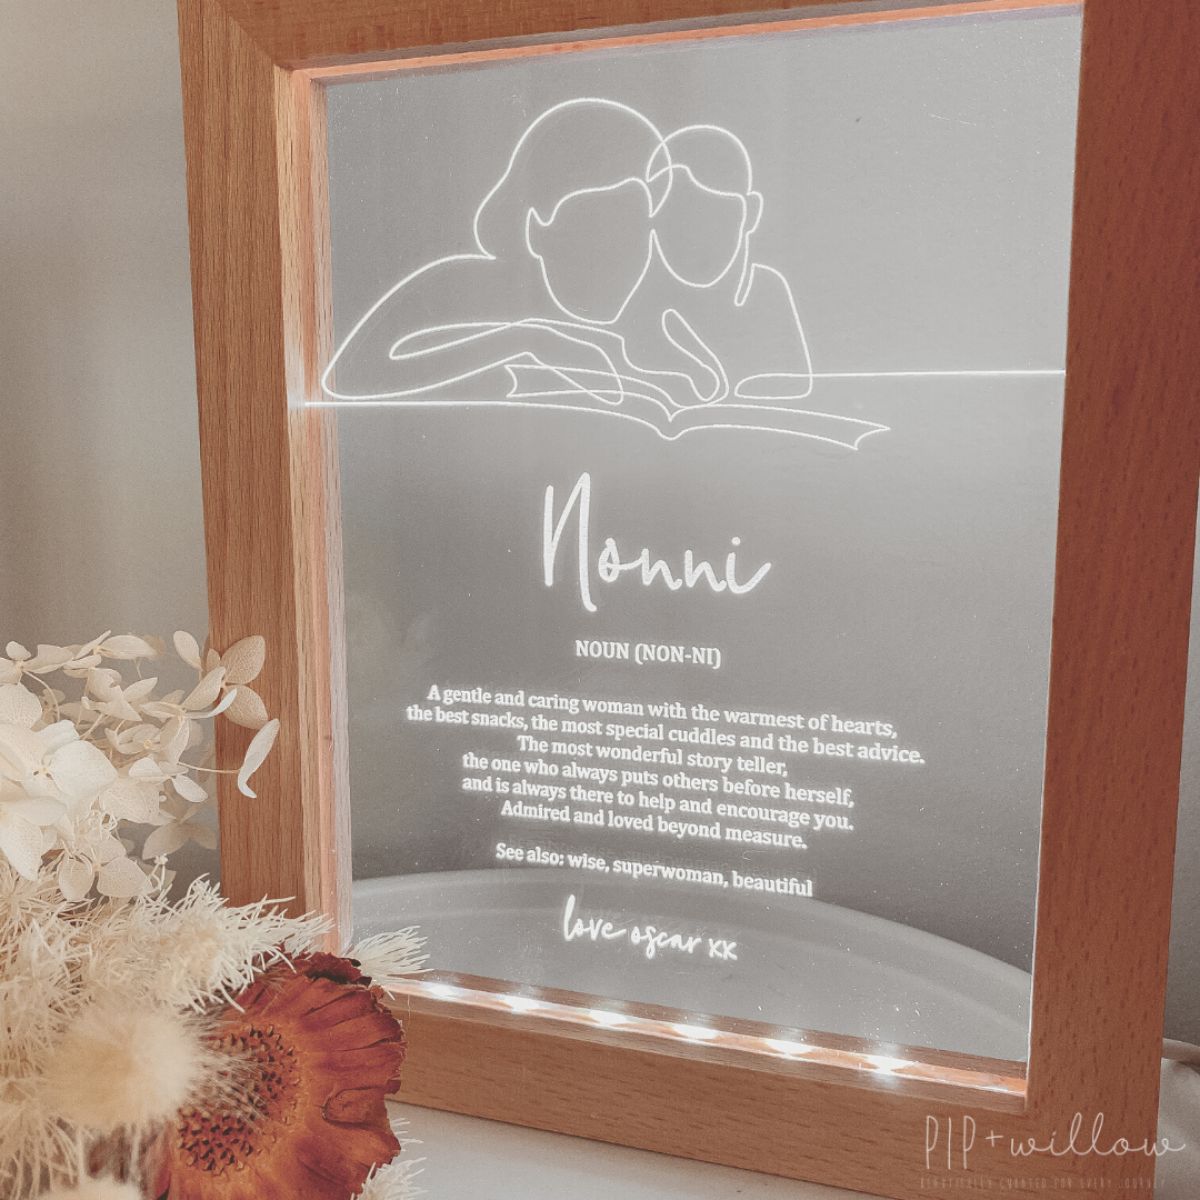 This is a Grandmother frame light normally given as a gift for Mother's day. The text on the frame is about a definition of a Grandmother. Photo is a closeup